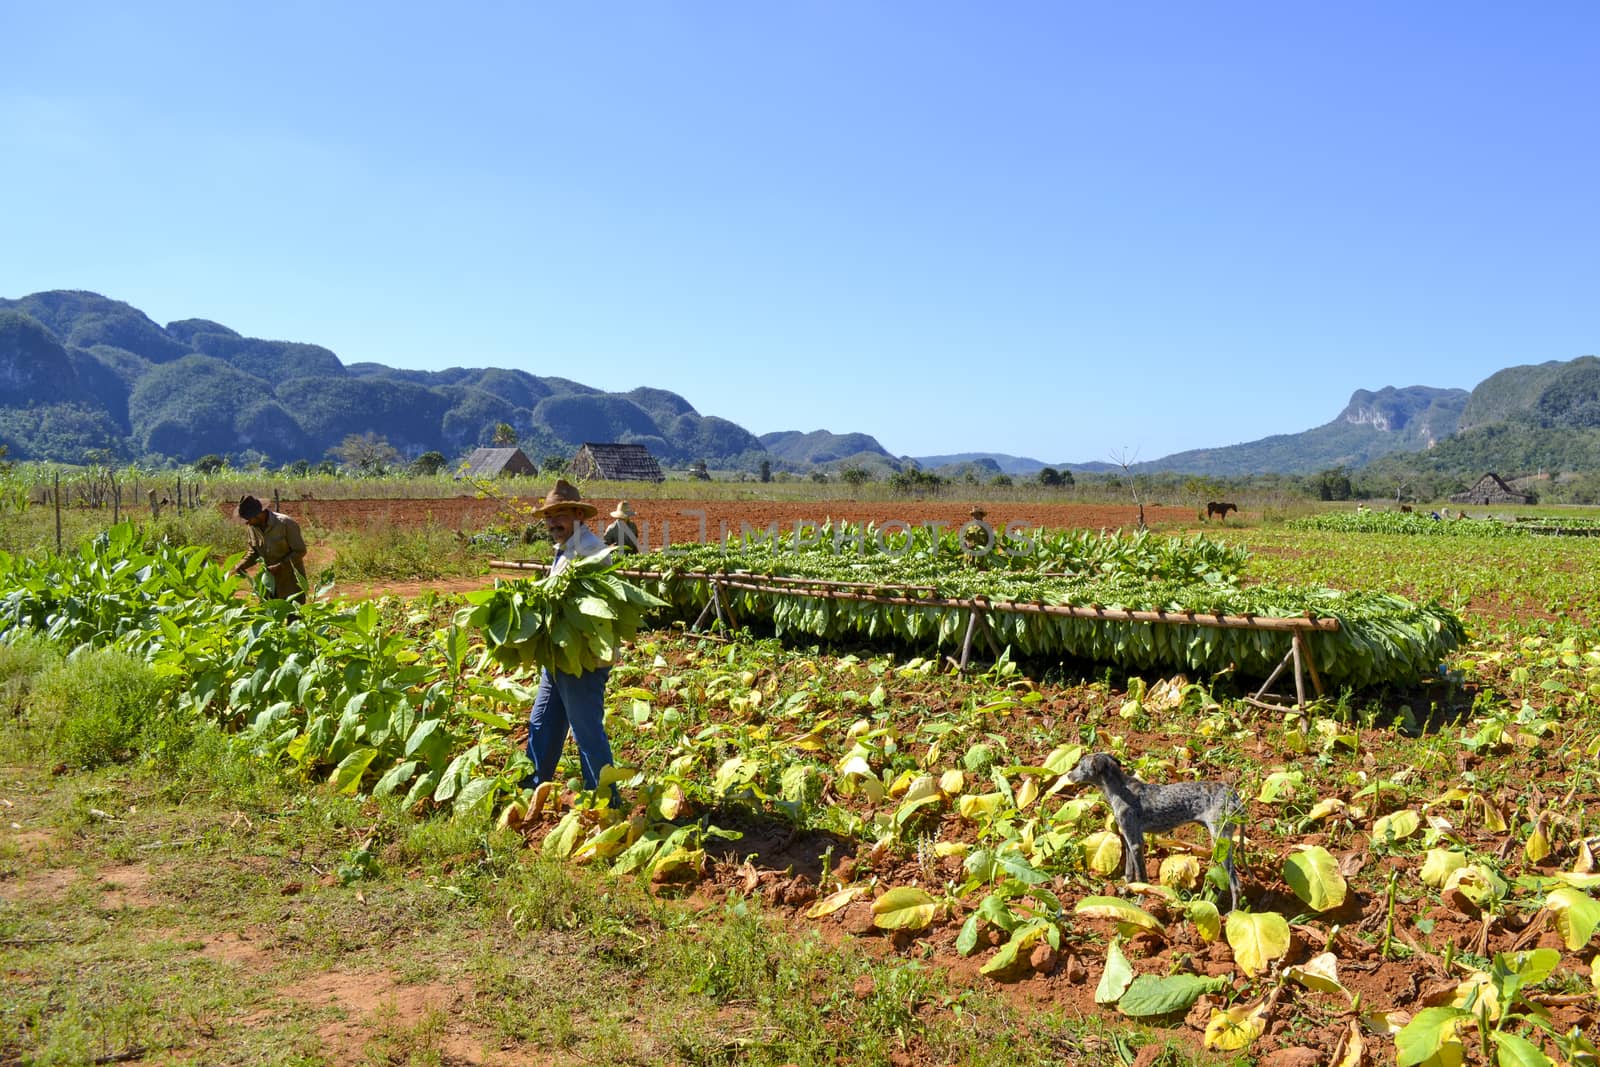 Tobacco farmers harvest the artisanal and manual way without machines in Vinales, Cuba. by kb79